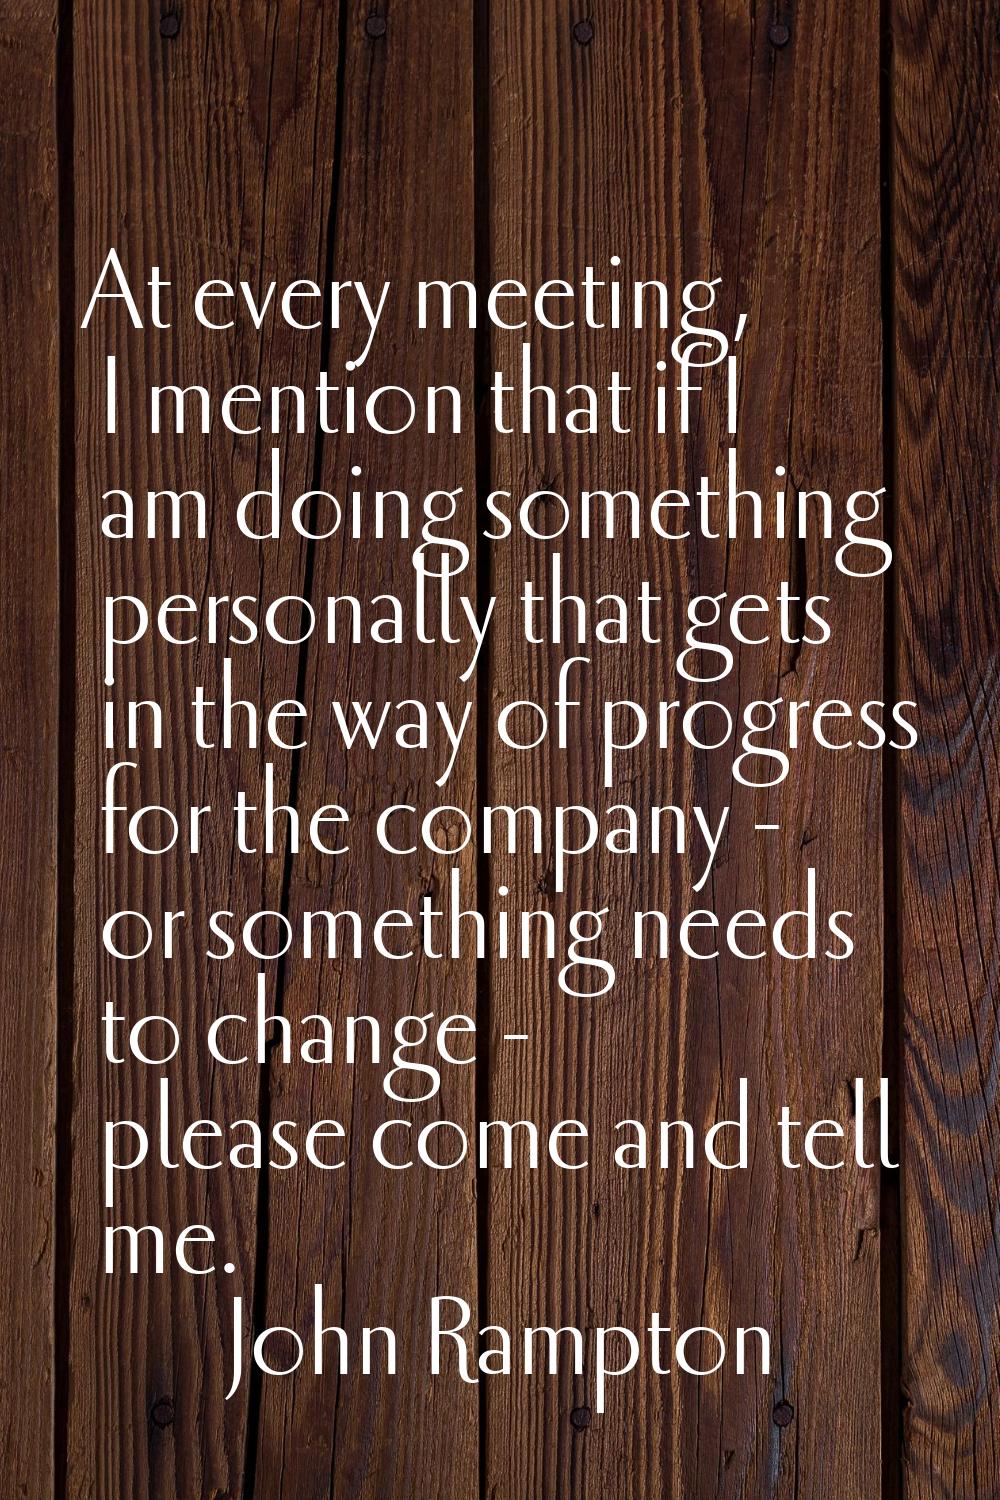 At every meeting, I mention that if I am doing something personally that gets in the way of progres